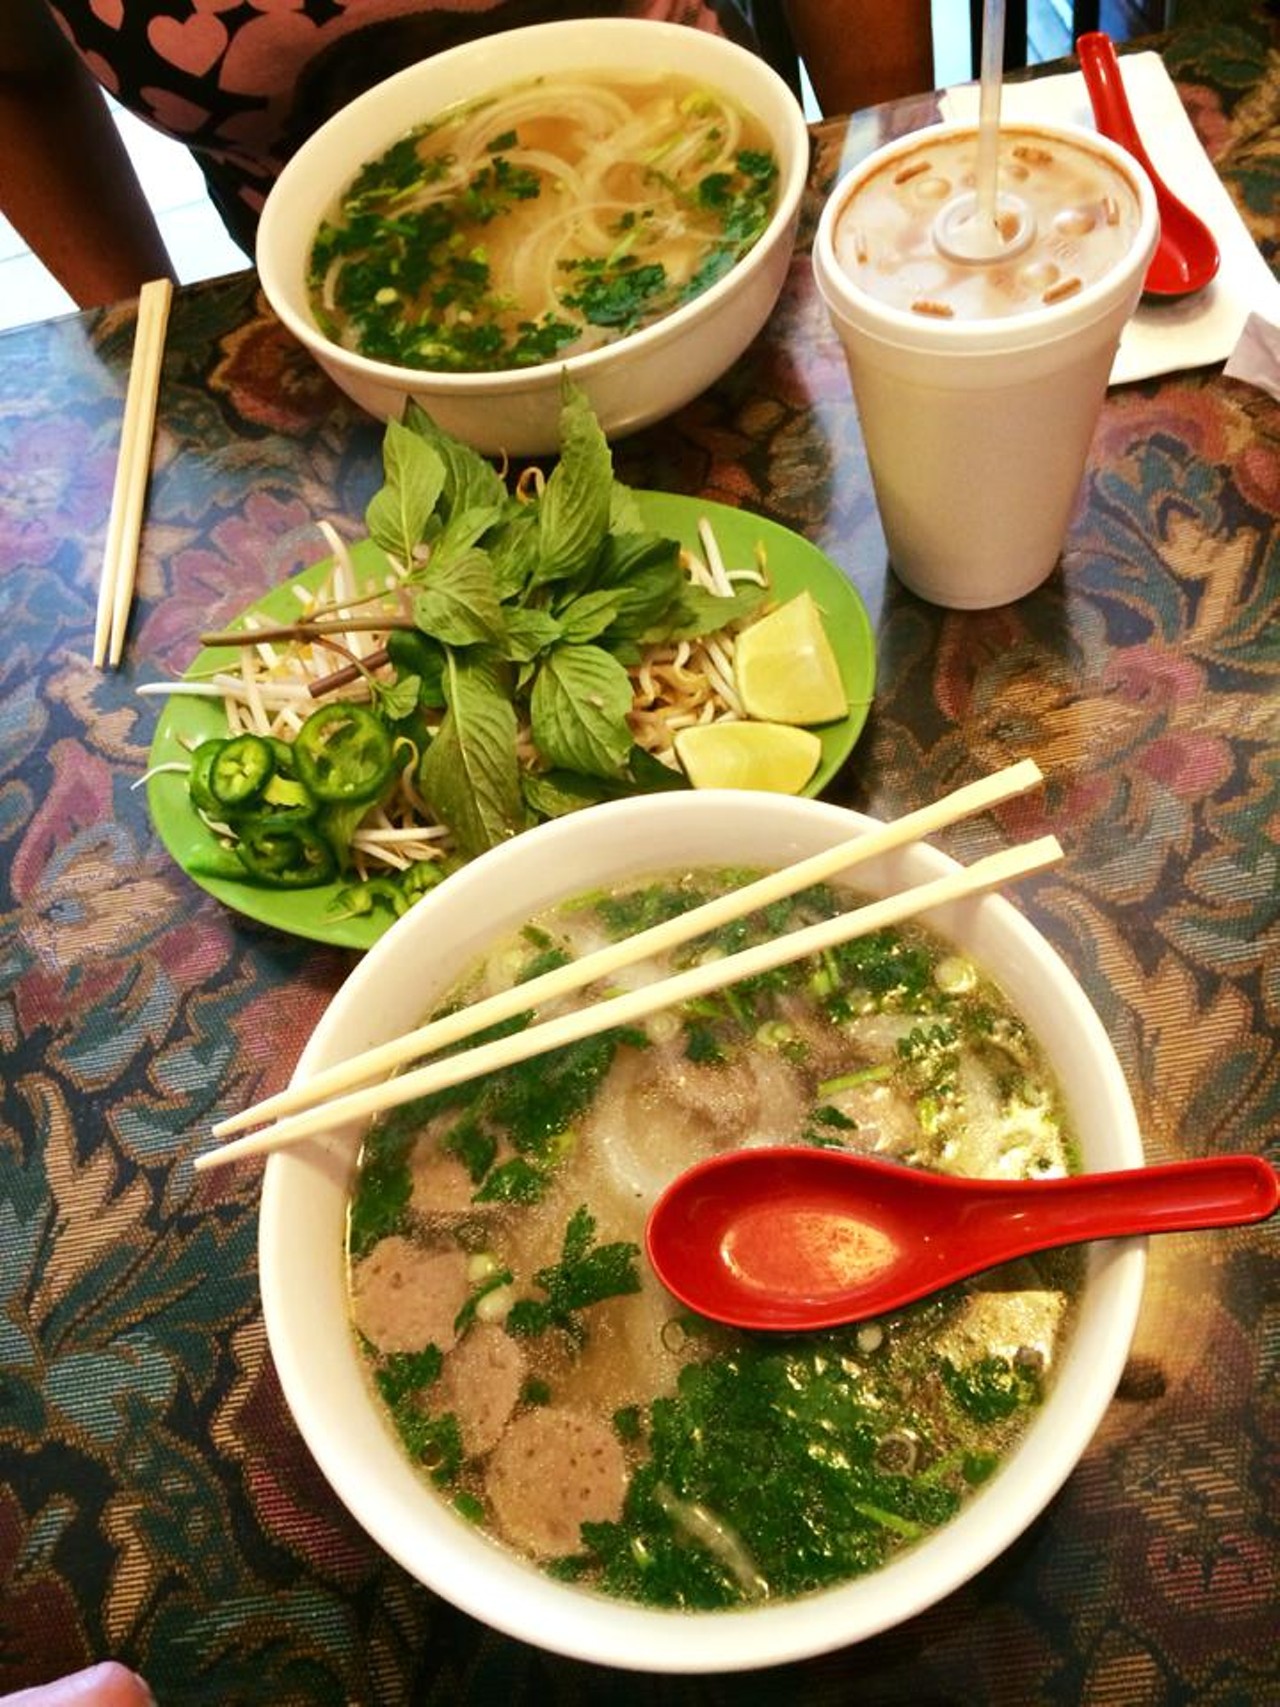 Que Huong
30820 John R Rd., Madison Heights; 248-588-0998
A Vietnamese grub hub, Que Huong can be easy to look over in its plain surroundings. If one is lucky enough to spot it, they would be remiss to not give this eatery a try. Its rice noodle soup, sandwiches, and other rice dishes are what make this Asian restaurant standout.
Photo via Facebook